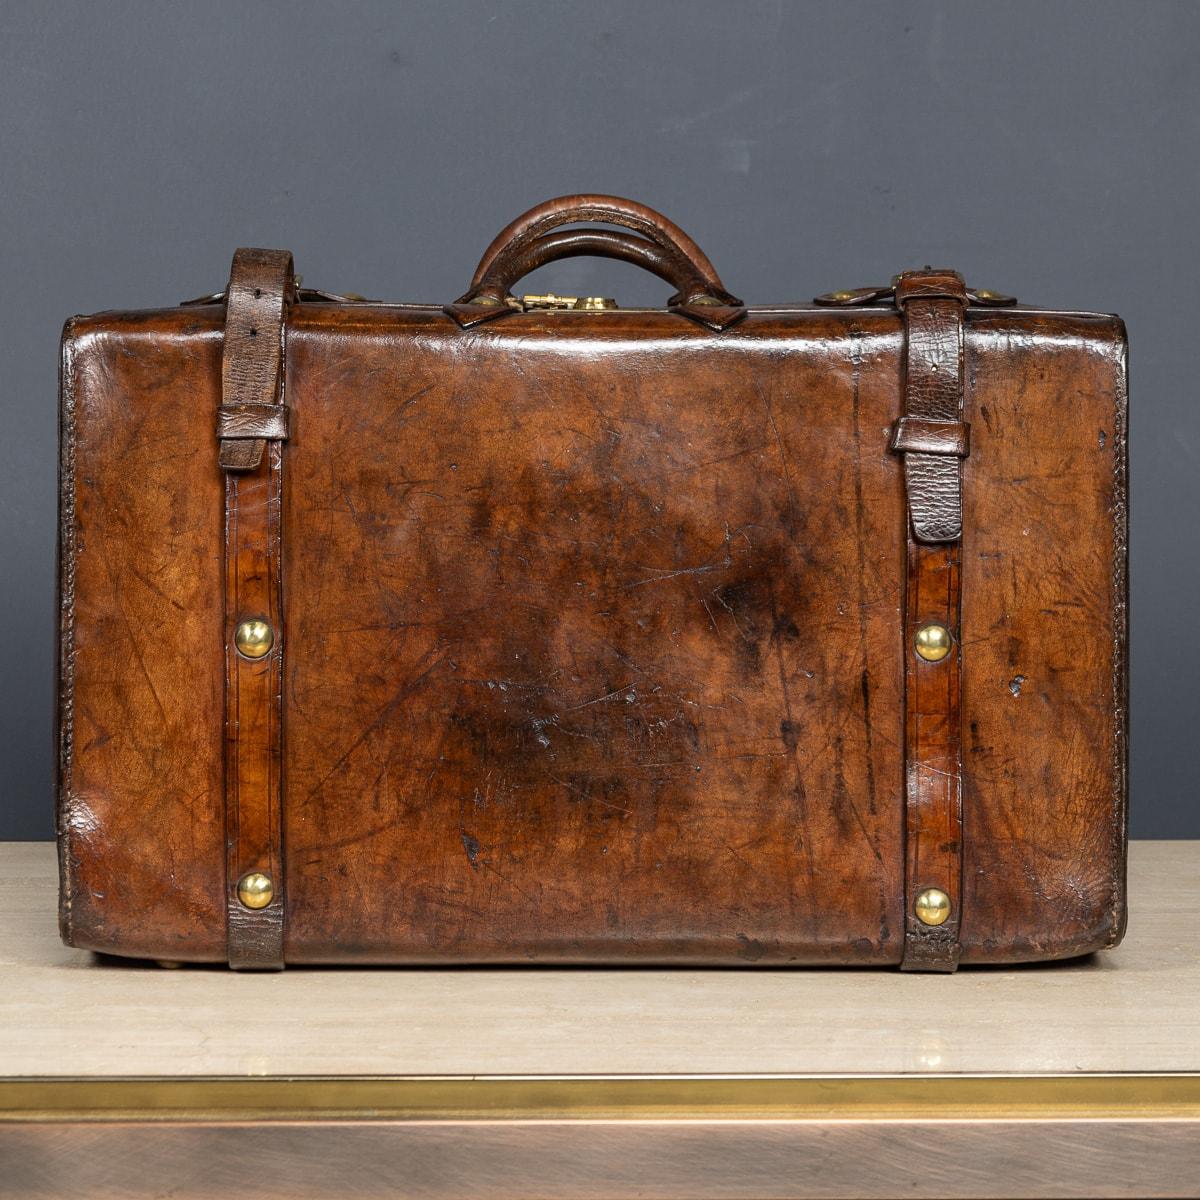 Antique 19th Century Victorian Leather Suitcase With Painted Crest c.1850 In Good Condition For Sale In Royal Tunbridge Wells, Kent